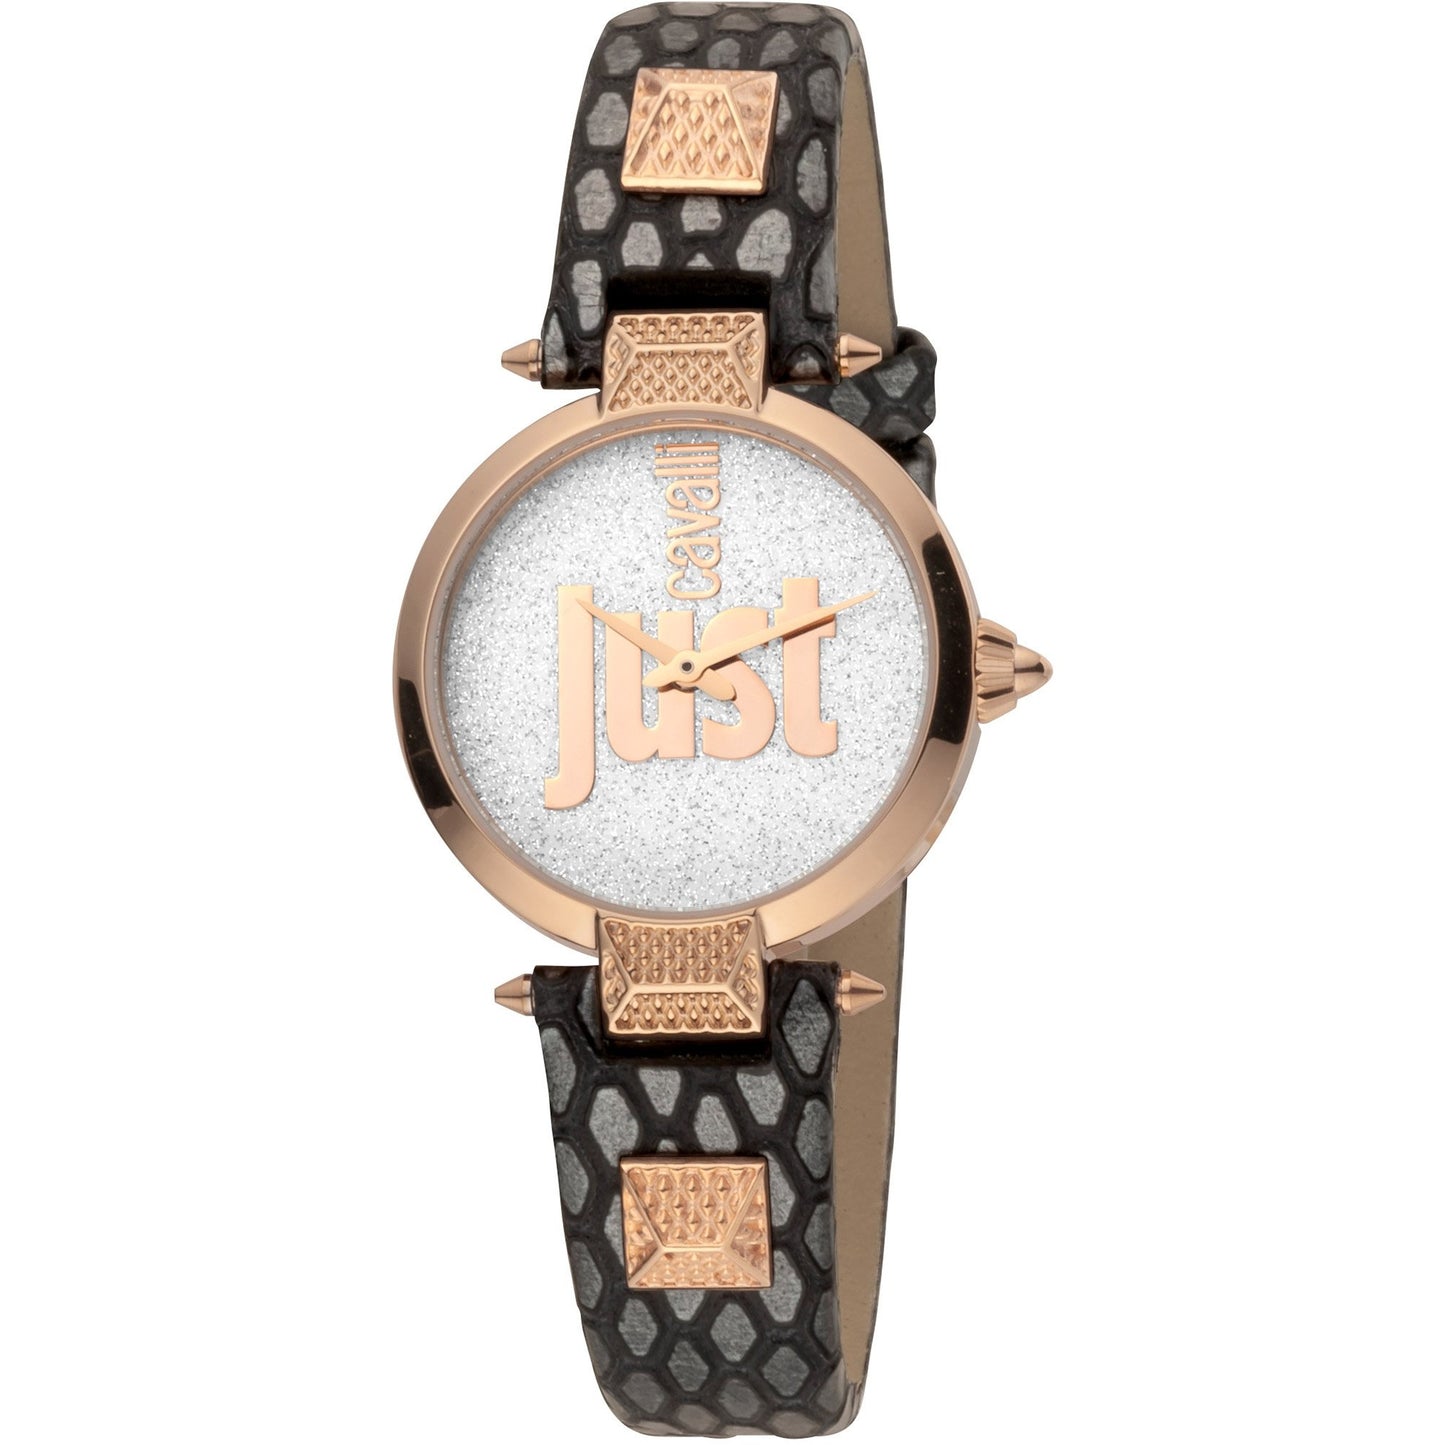 JUST CAVALLI Infamay Leather Grey Leopard Watch